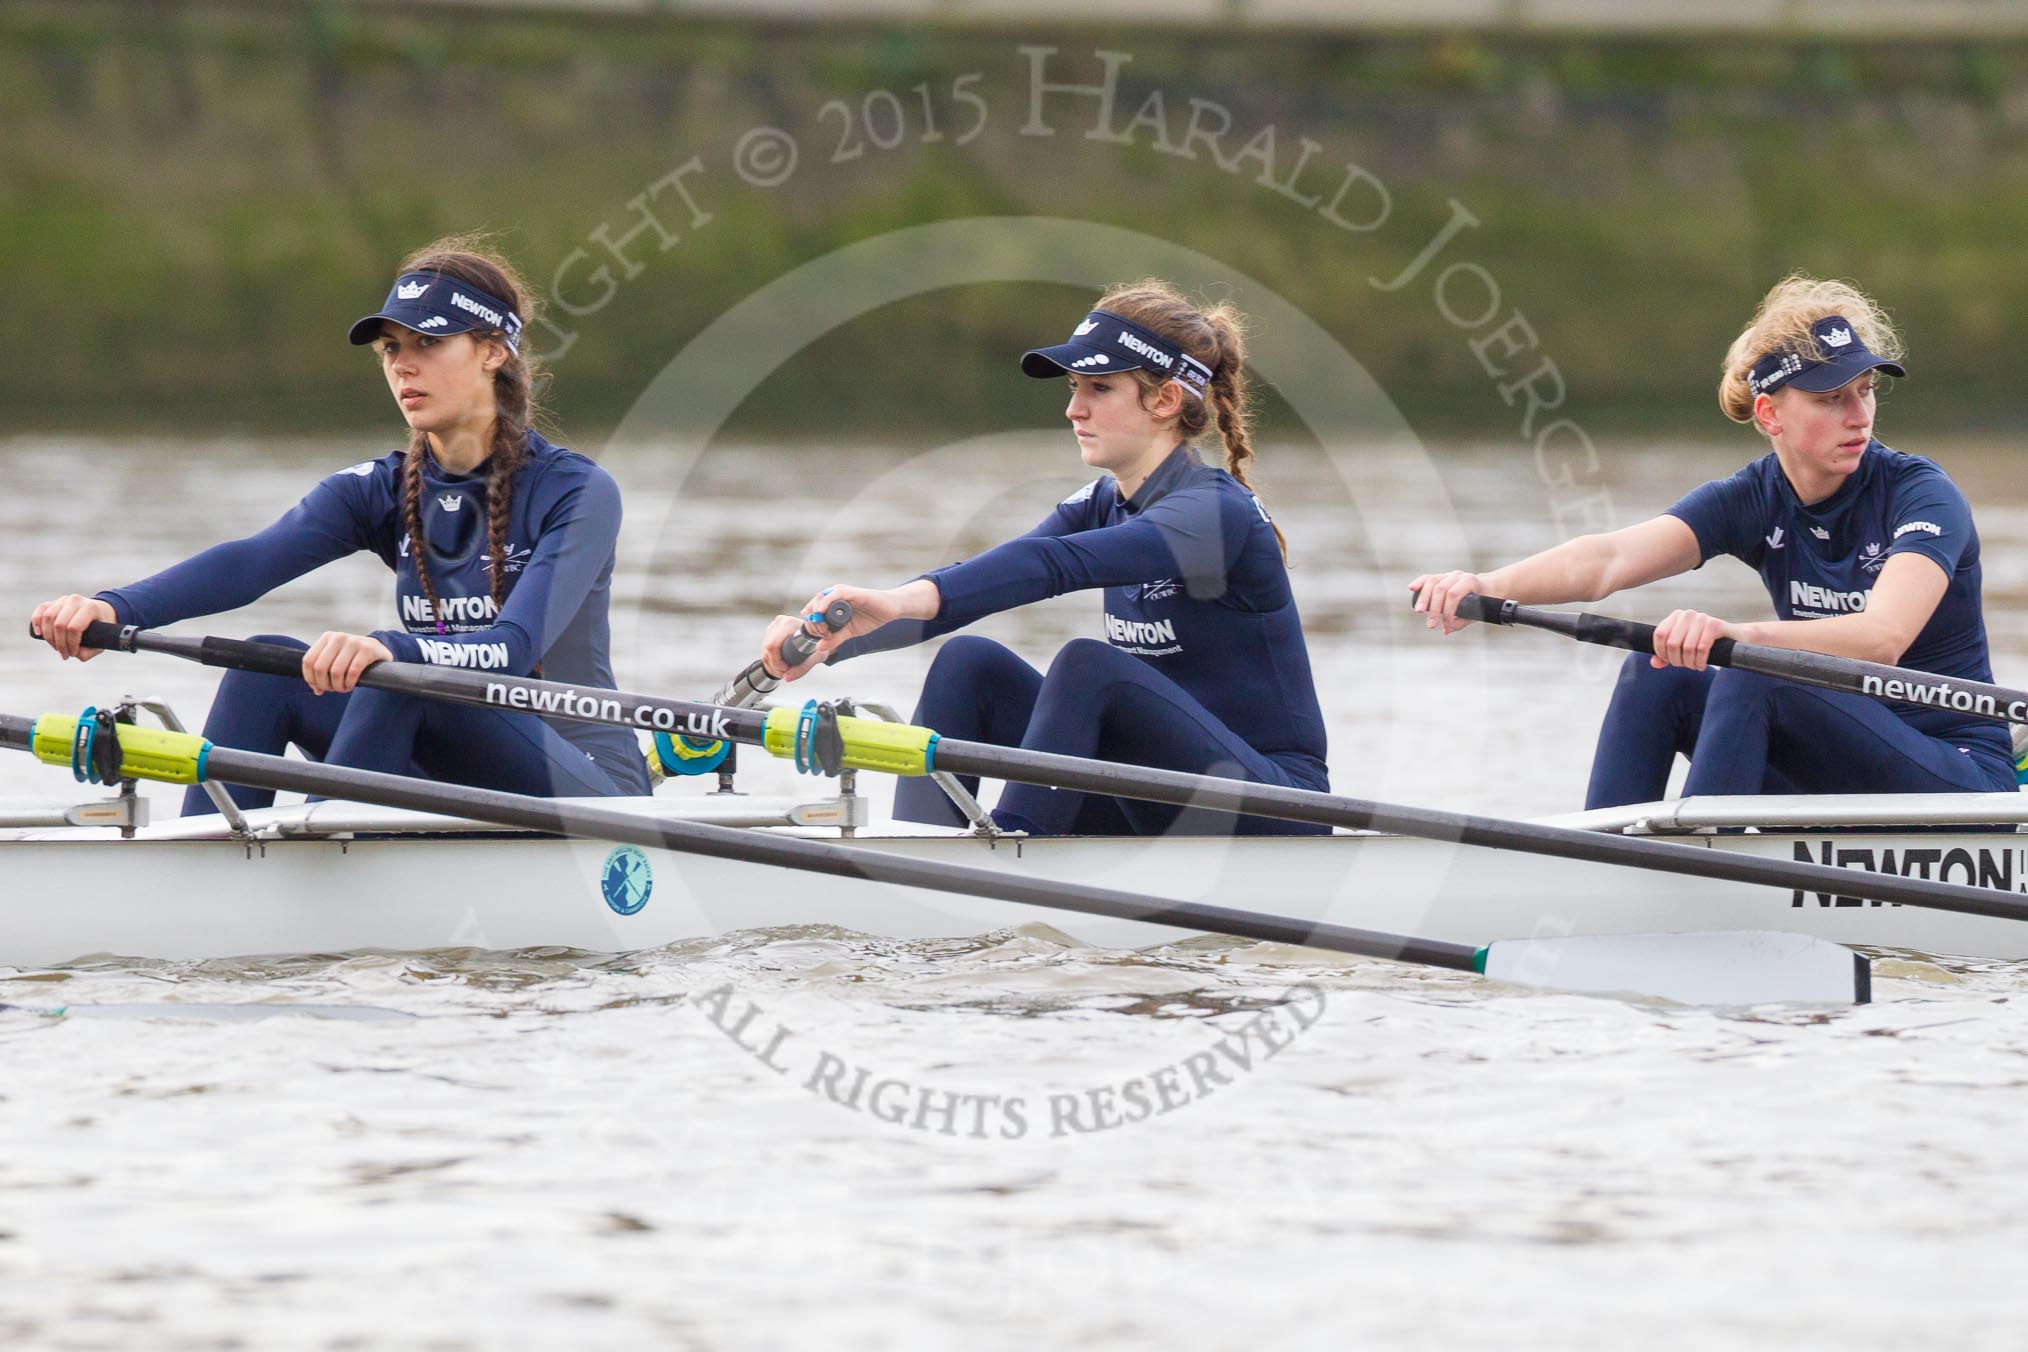 The Boat Race season 2016 - Women's Boat Race Trial Eights (OUWBC, Oxford): "Scylla" waiting for the start of the race, here 4-Rebecca Te Water Naude, 3-Elettra Ardissino, 2-Merel Lefferts.
River Thames between Putney Bridge and Mortlake,
London SW15,

United Kingdom,
on 10 December 2015 at 12:17, image #130